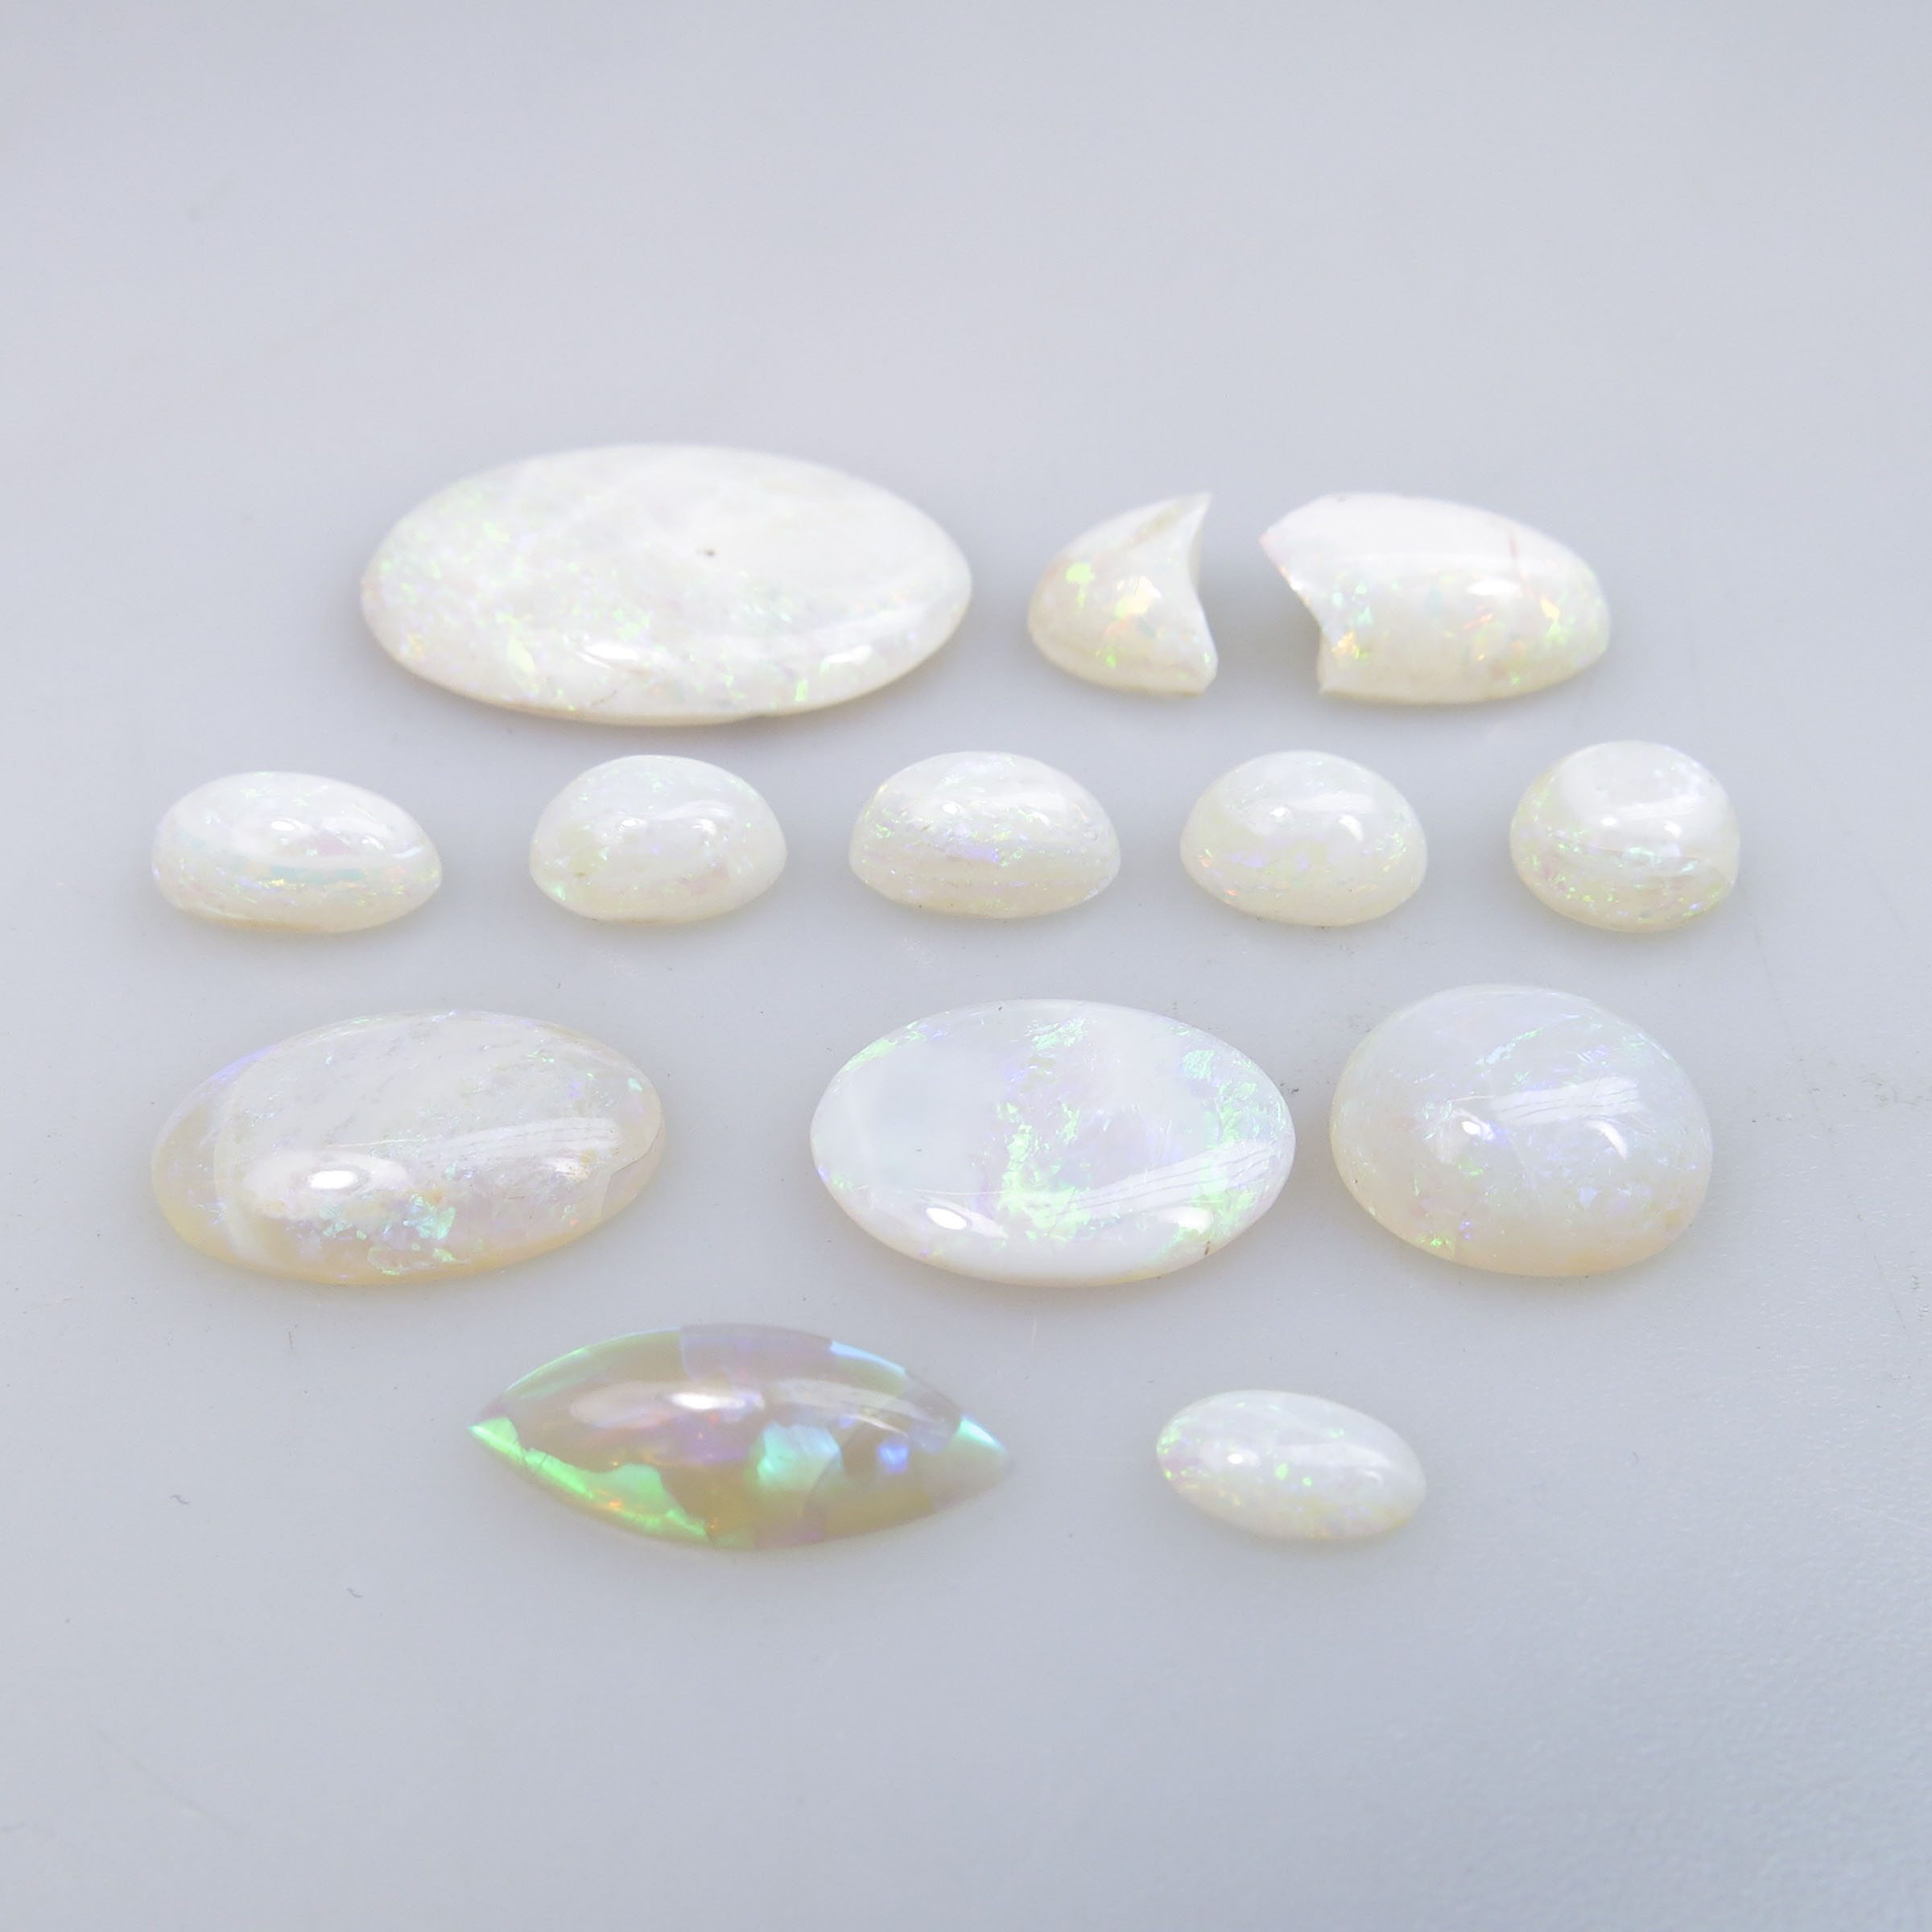 12 Oval, Circular And Navette Opal Cabochons